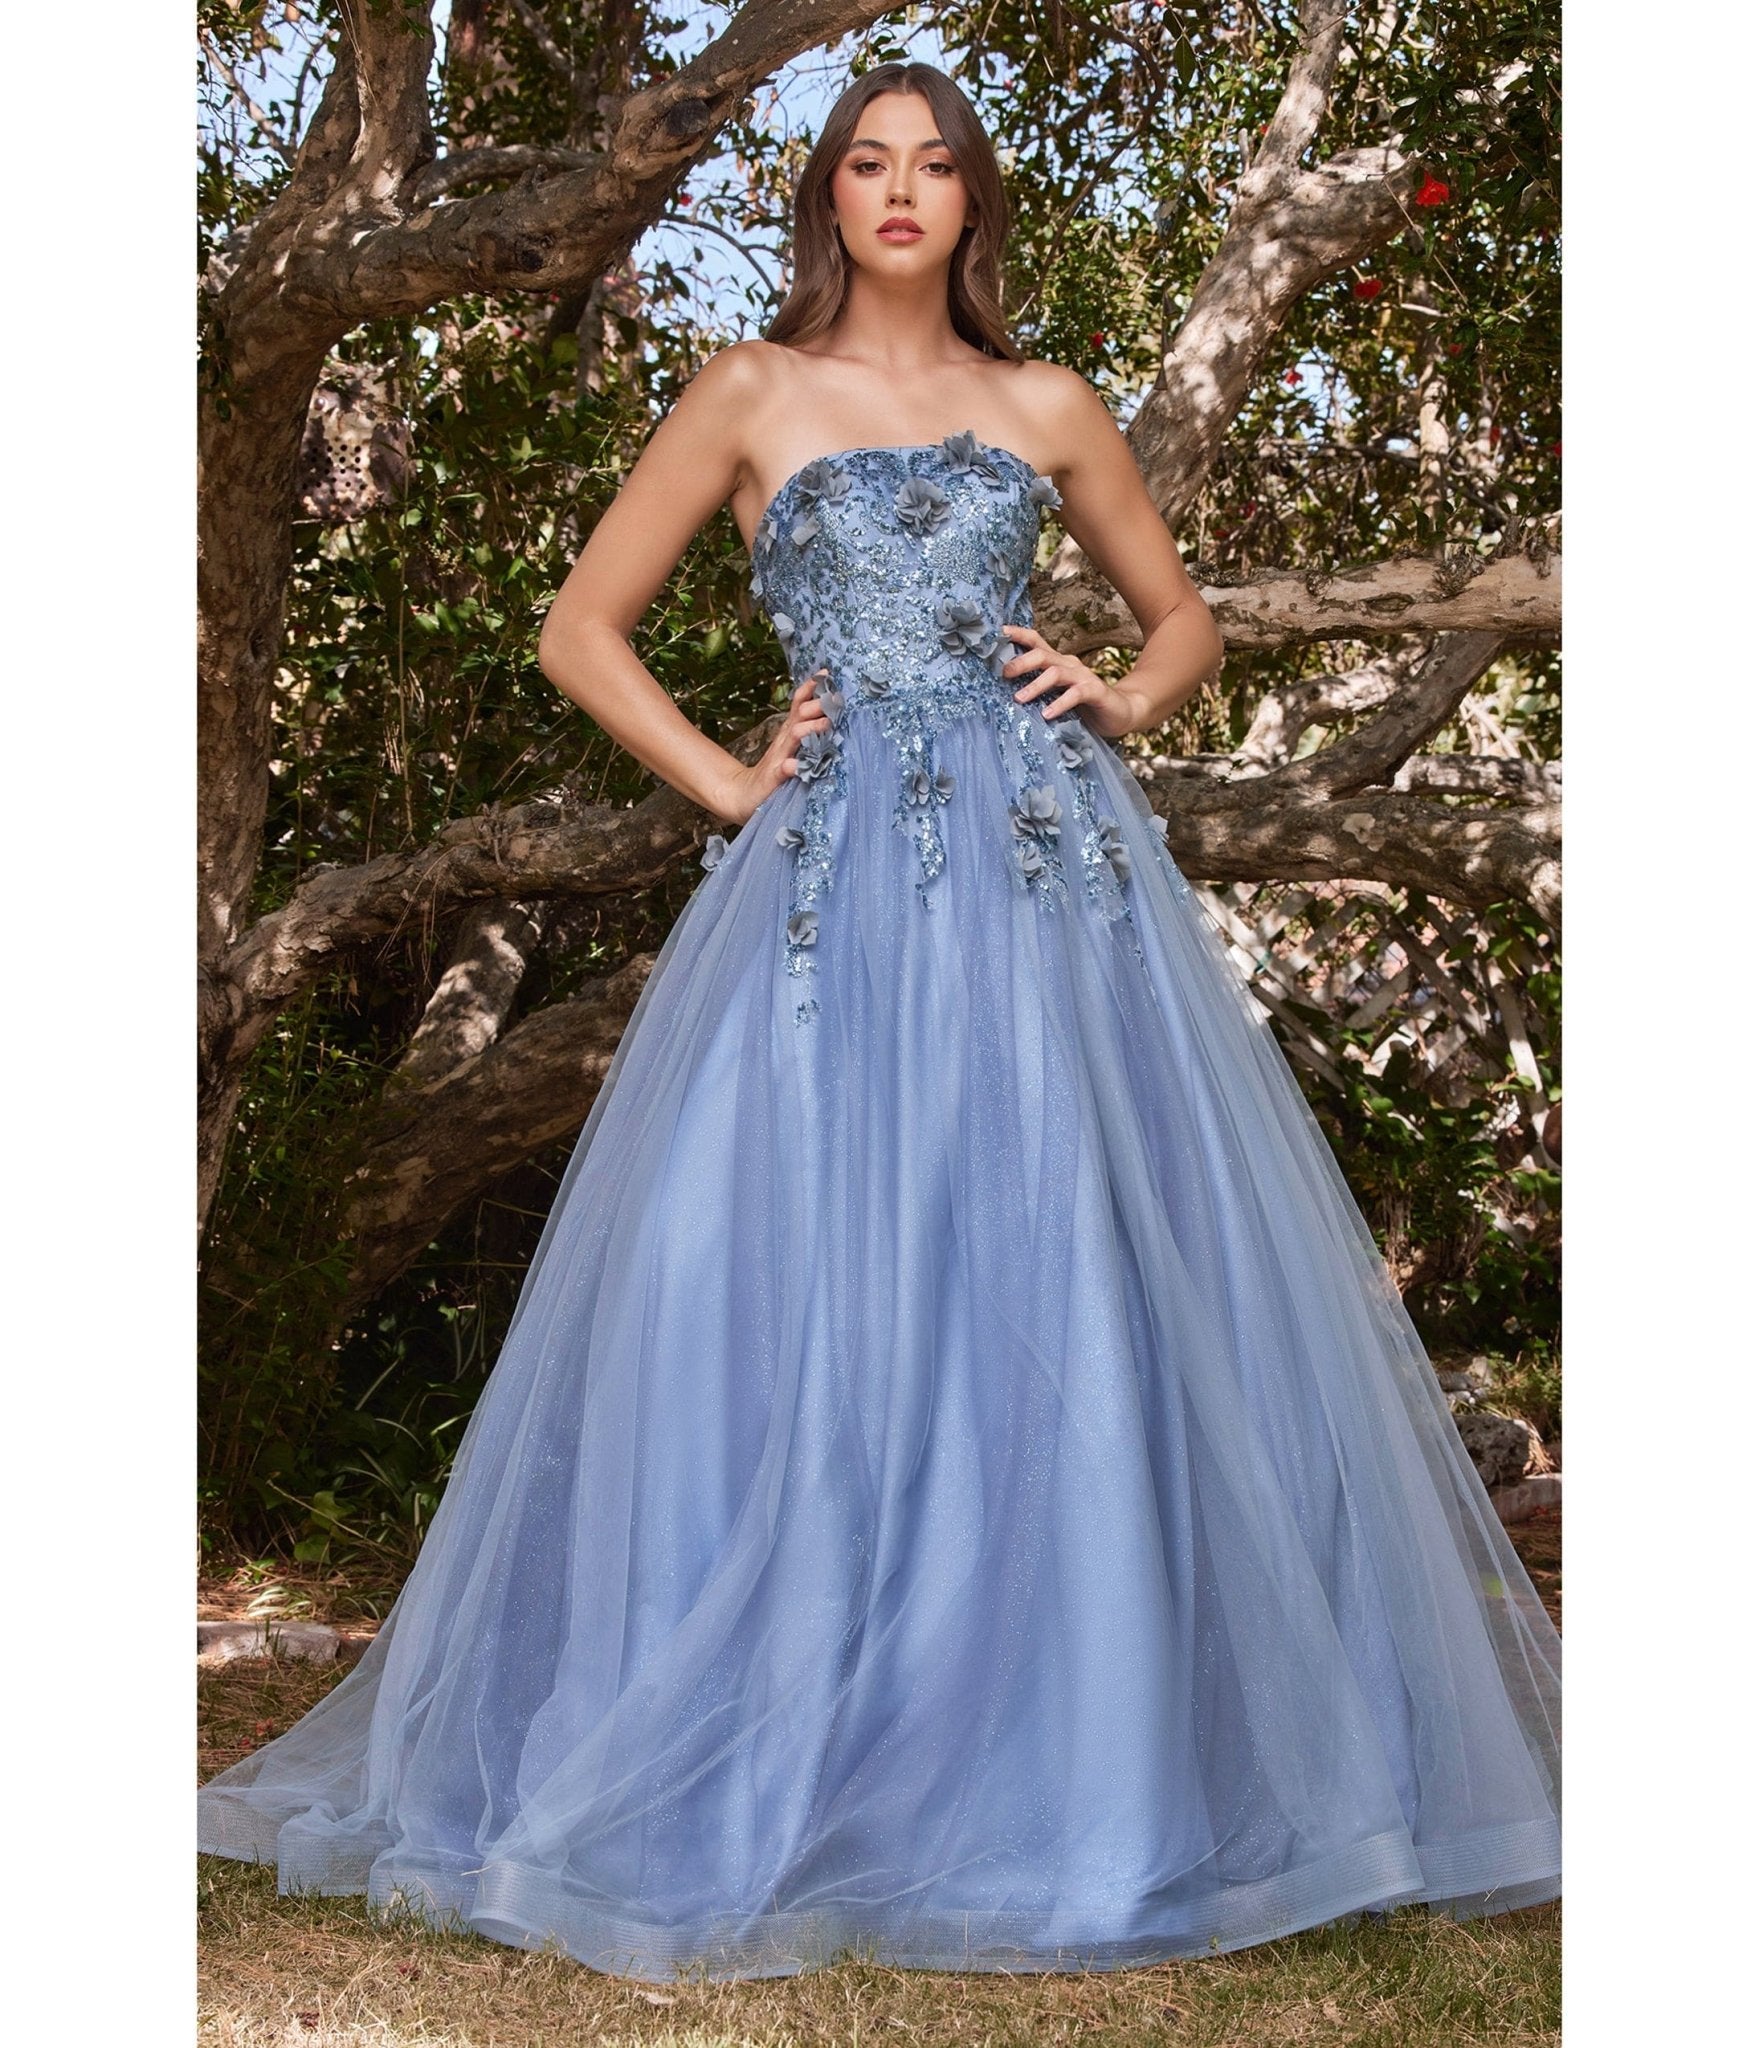 Strapless Sweetheart Neck Yellow Satin Long Prom Dresses with 3D Flowe –  Eip Collection